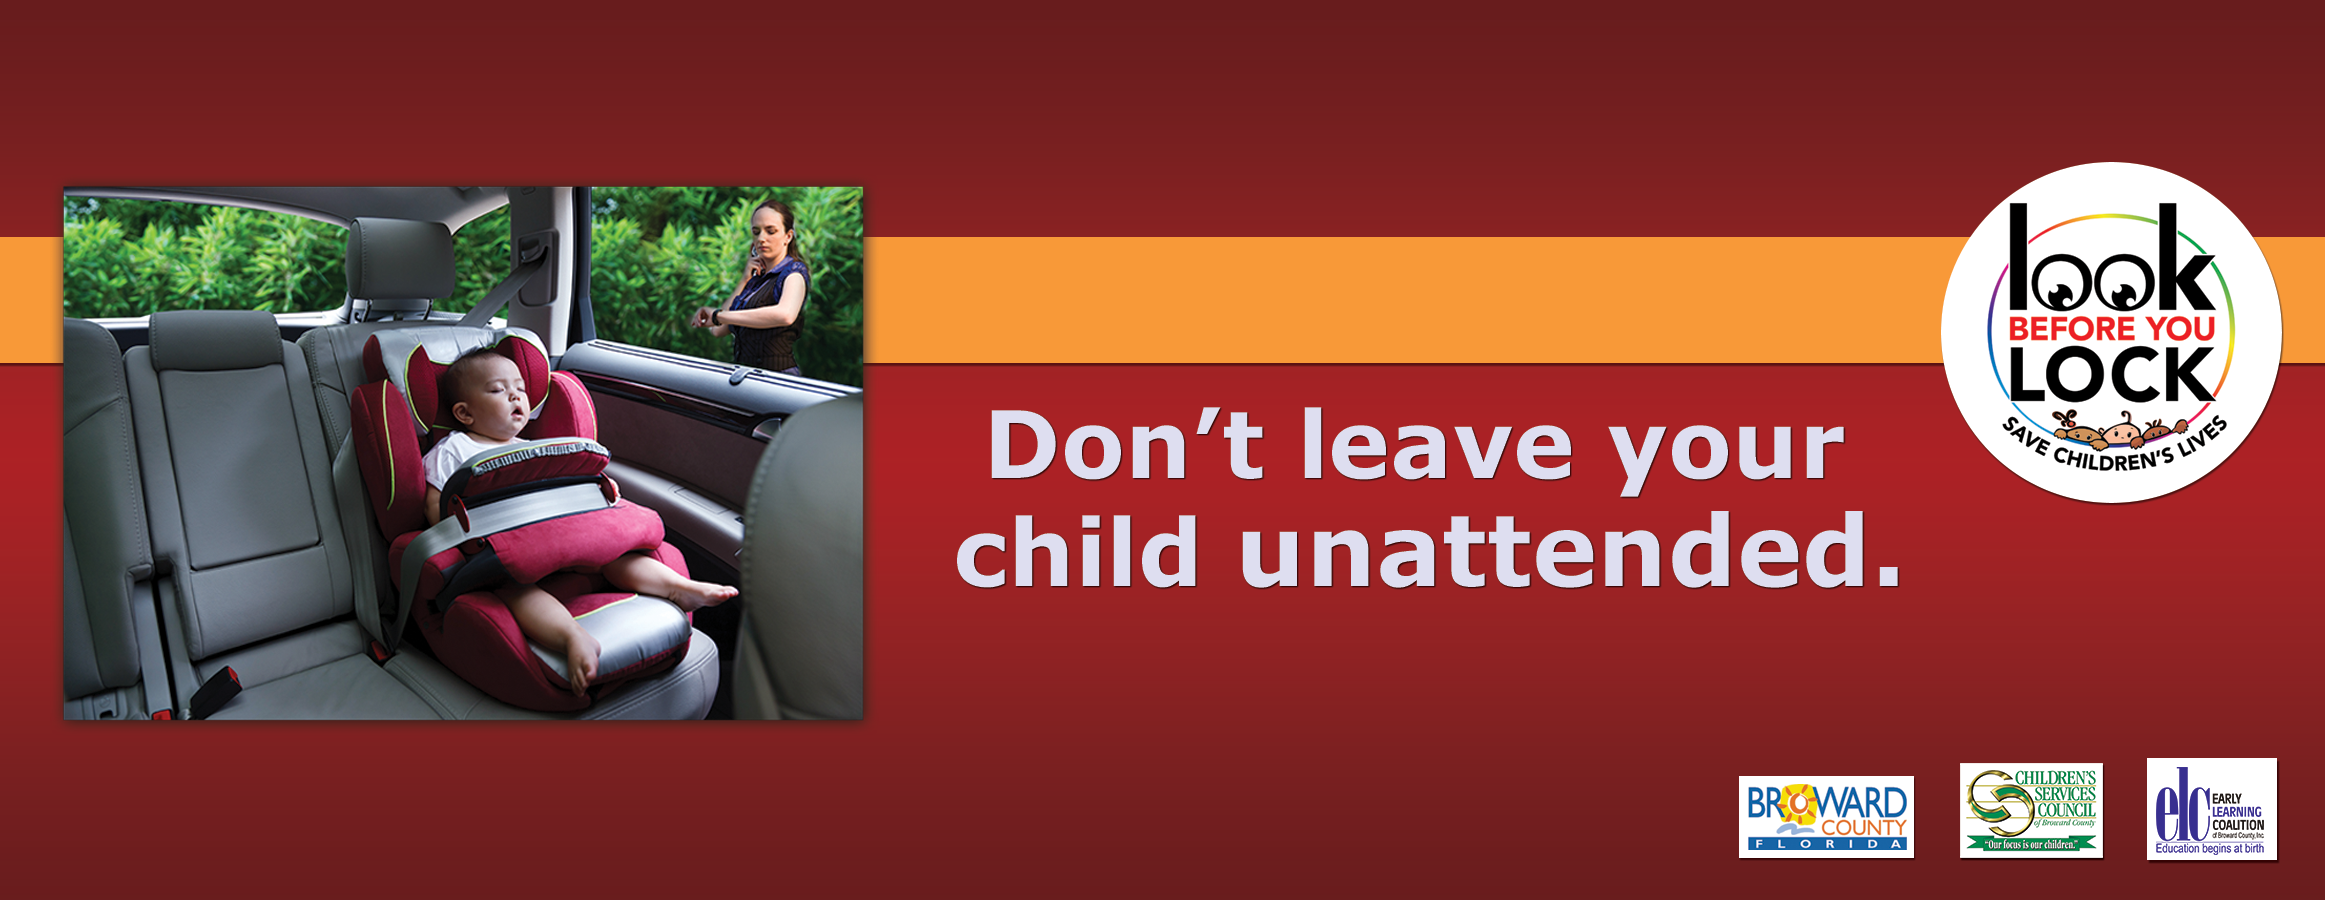 Don't leave your child unattended...Look Before You Lock